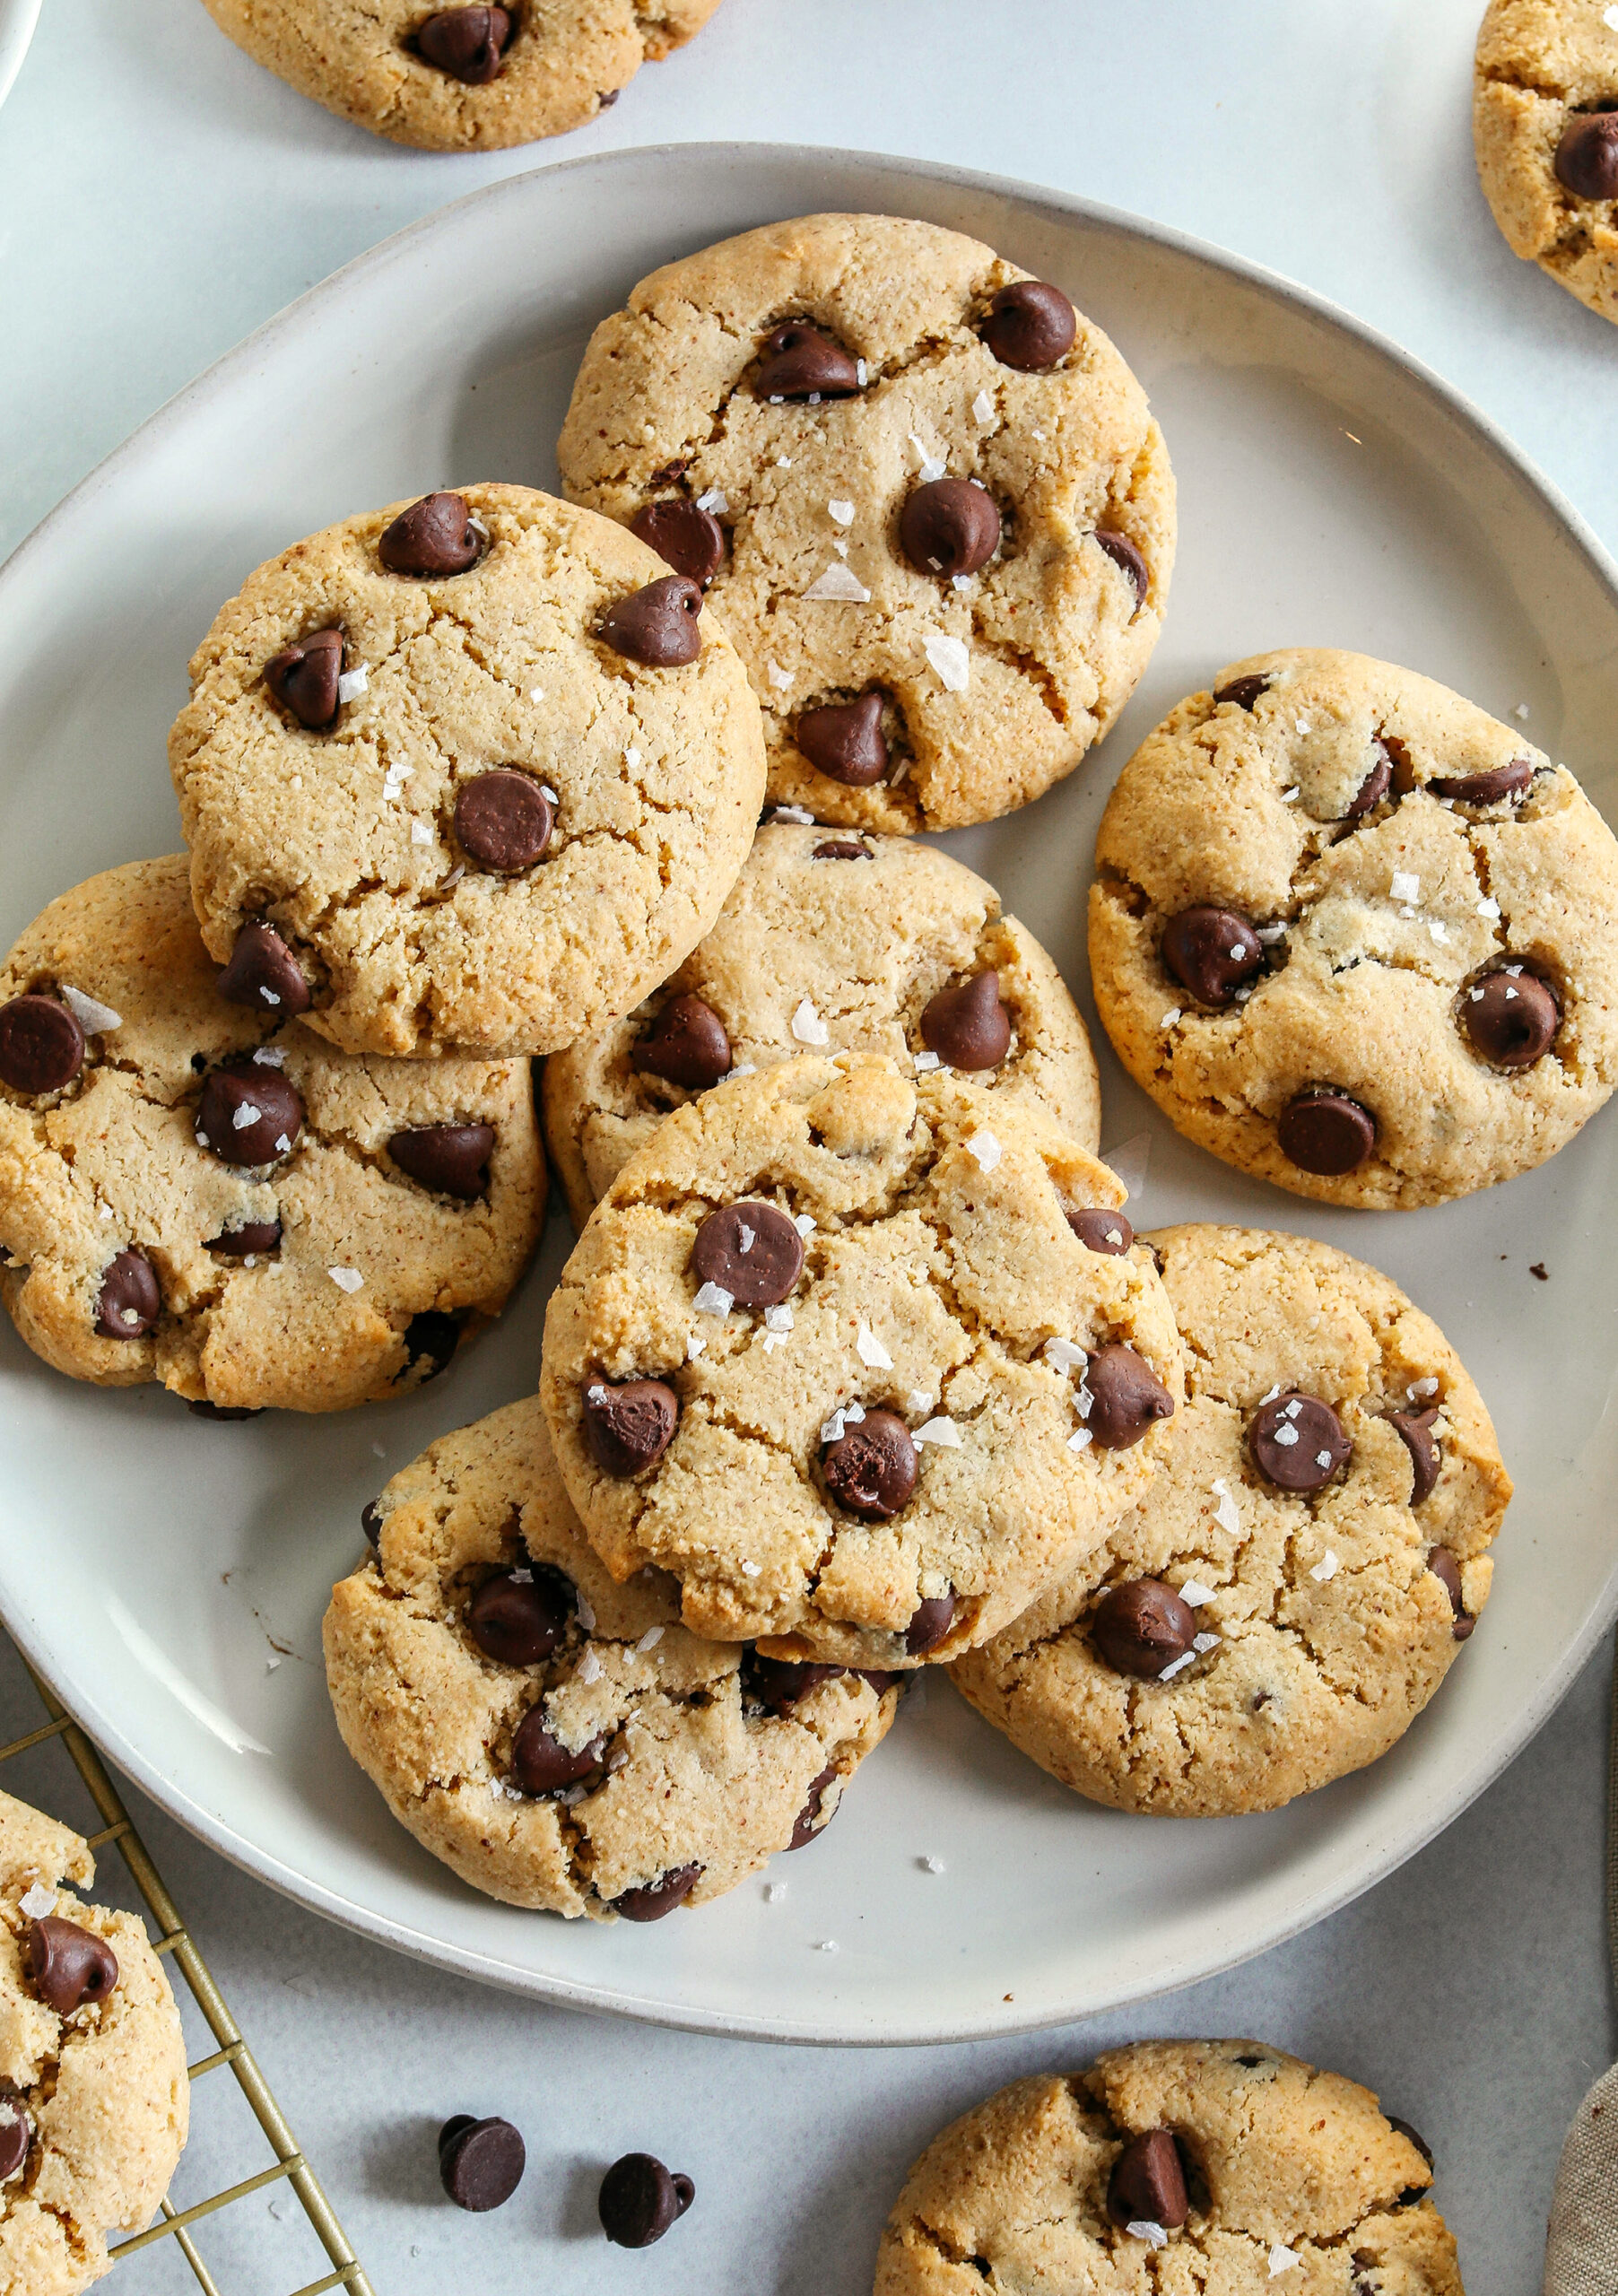 Healthy Chocolate Chip Cookies that are soft, chewy, and absolutely delicious with gooey chocolate chips in every bite!  These gluten-free cookies are made with wholesome ingredients and use zero oil or refined sugar for the perfect sweet treat everyone will enjoy!